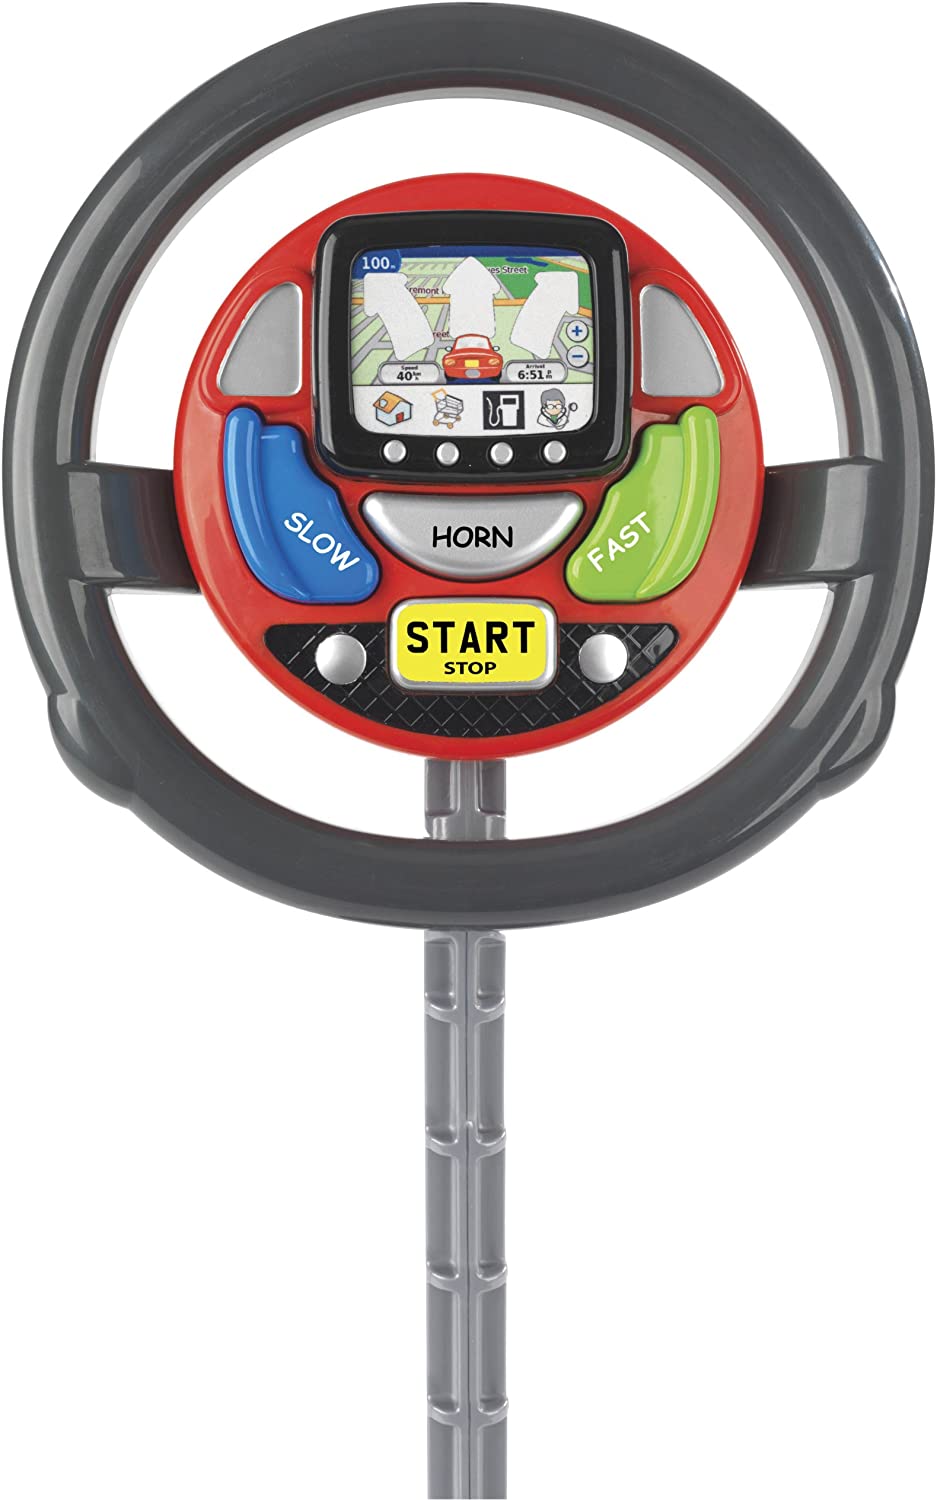 Casdon Sat Nav Steering Wheel | Toy Steering Wheel For Children Aged 3+ | Provides Endless Excitement With Spoken Commands And Motoring Sounds!